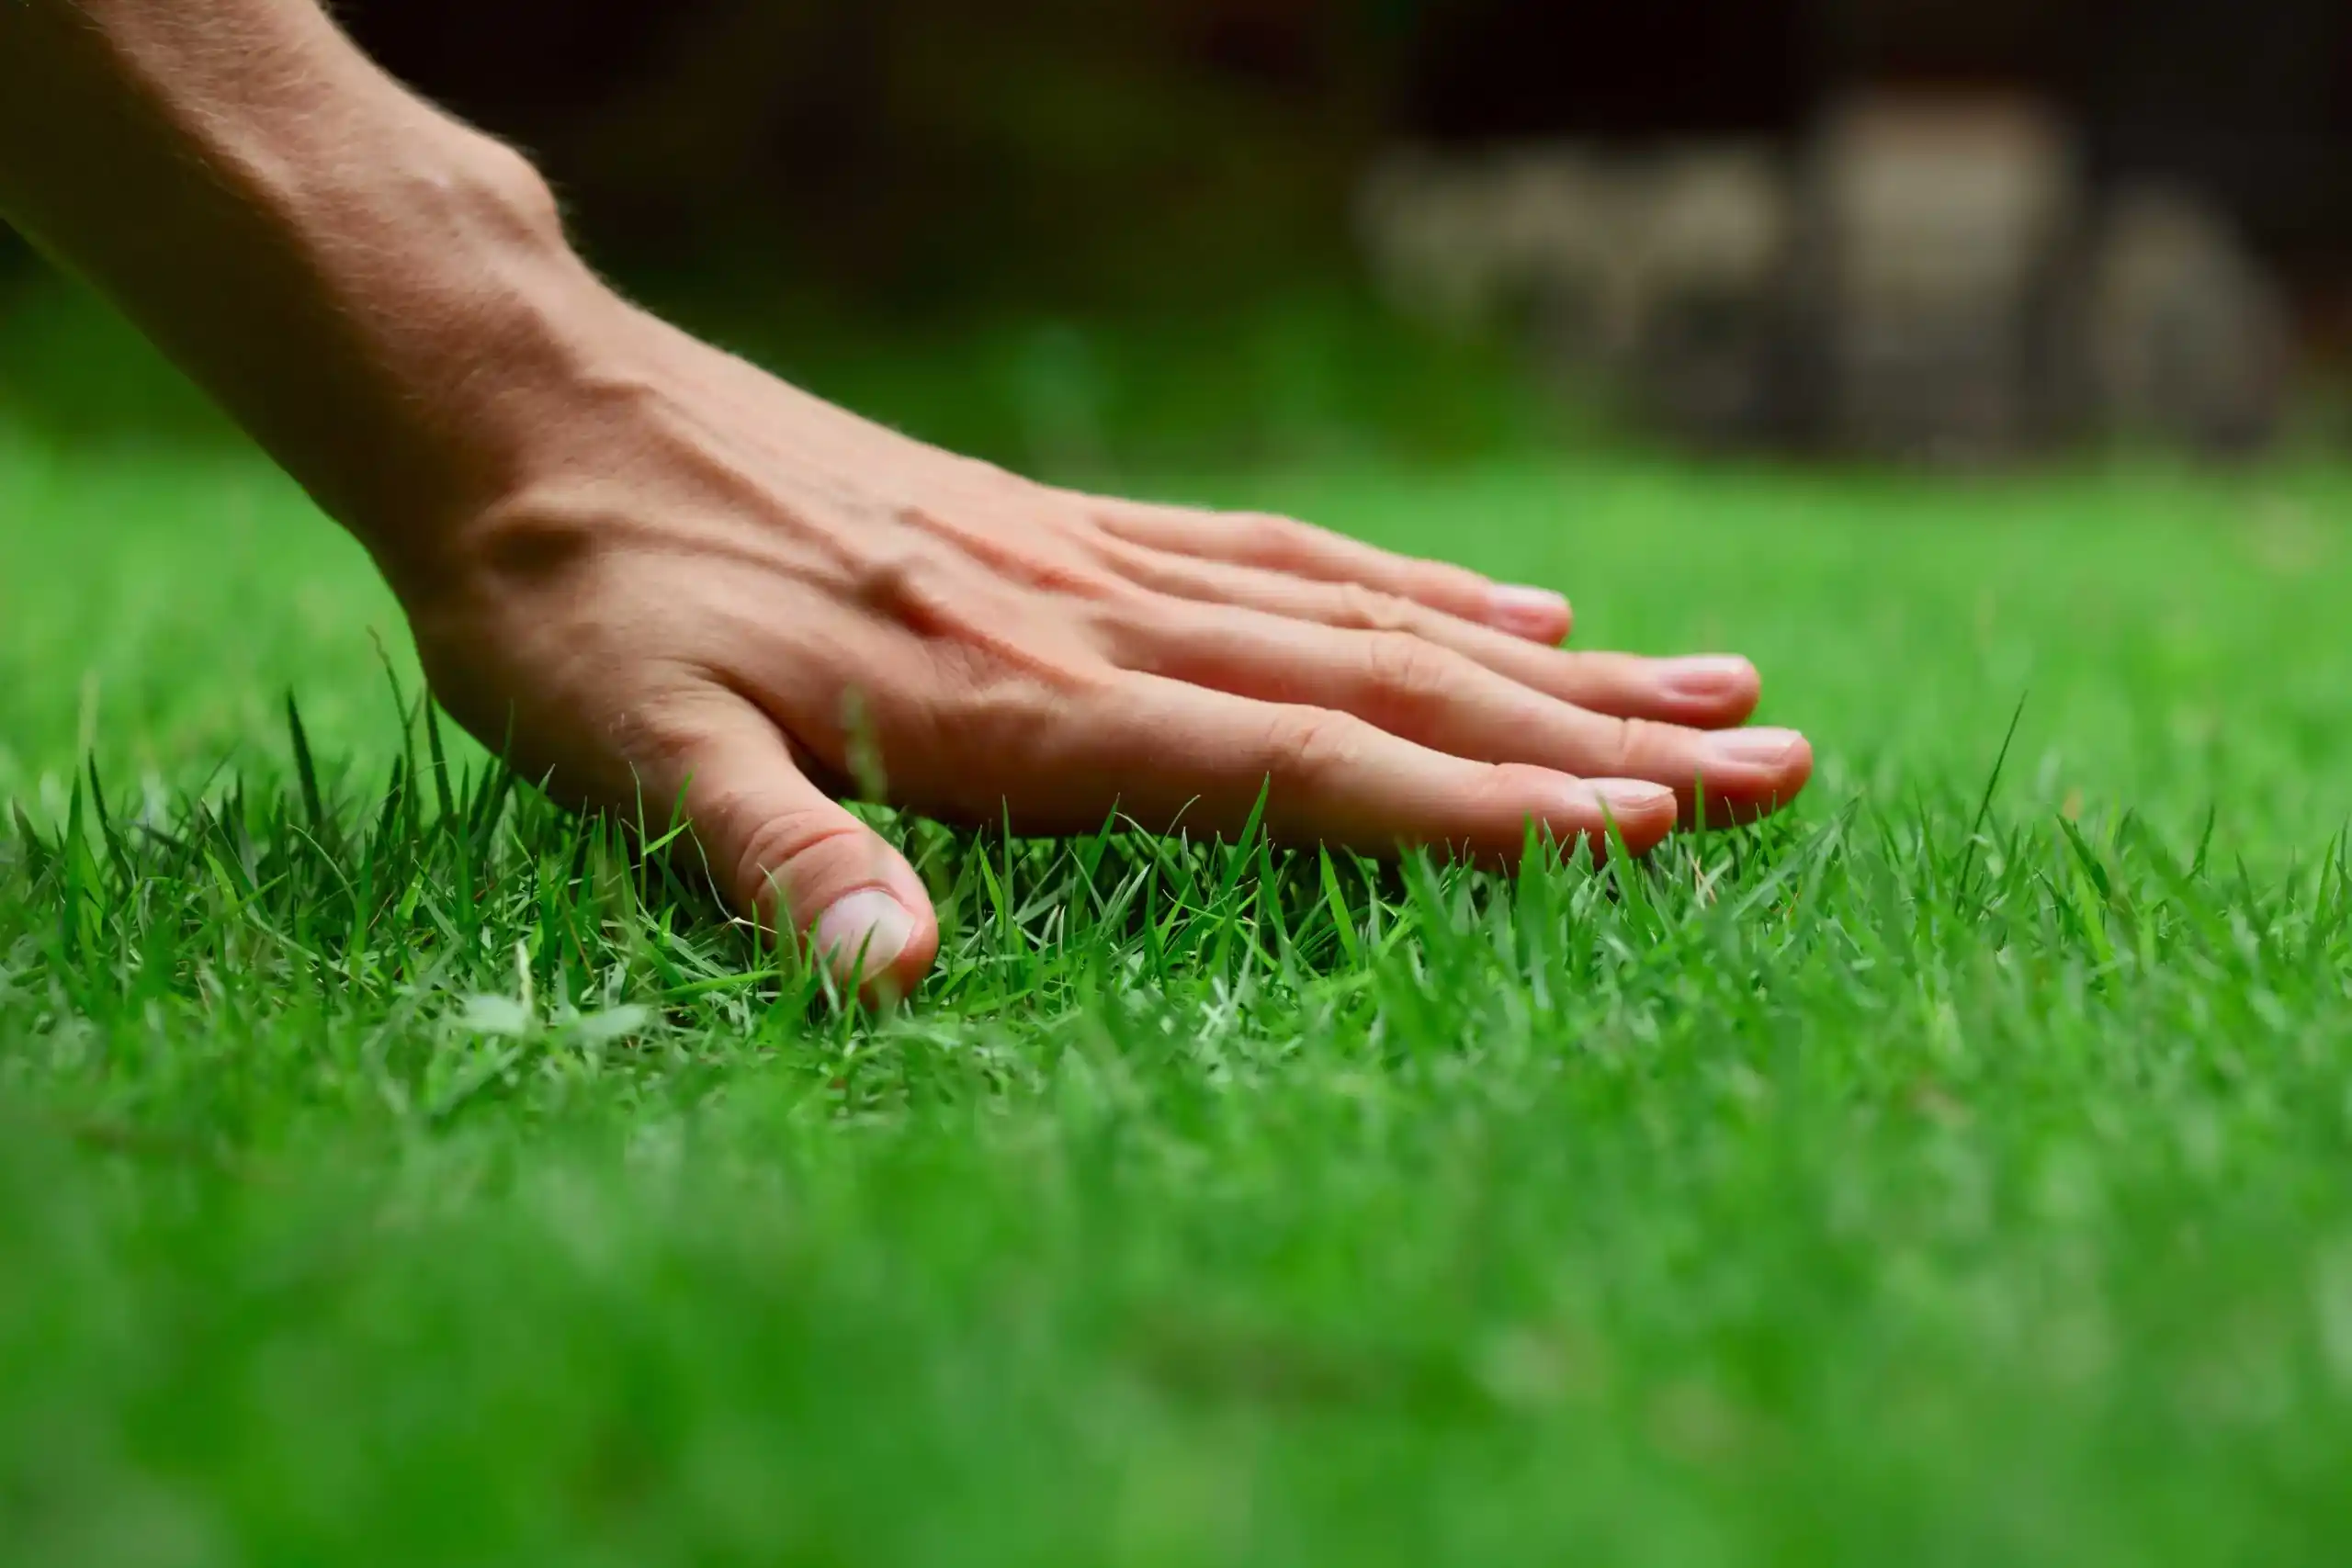 Peron's hand touching a lush healthy lawn - keep pests away from your home with florida pest control